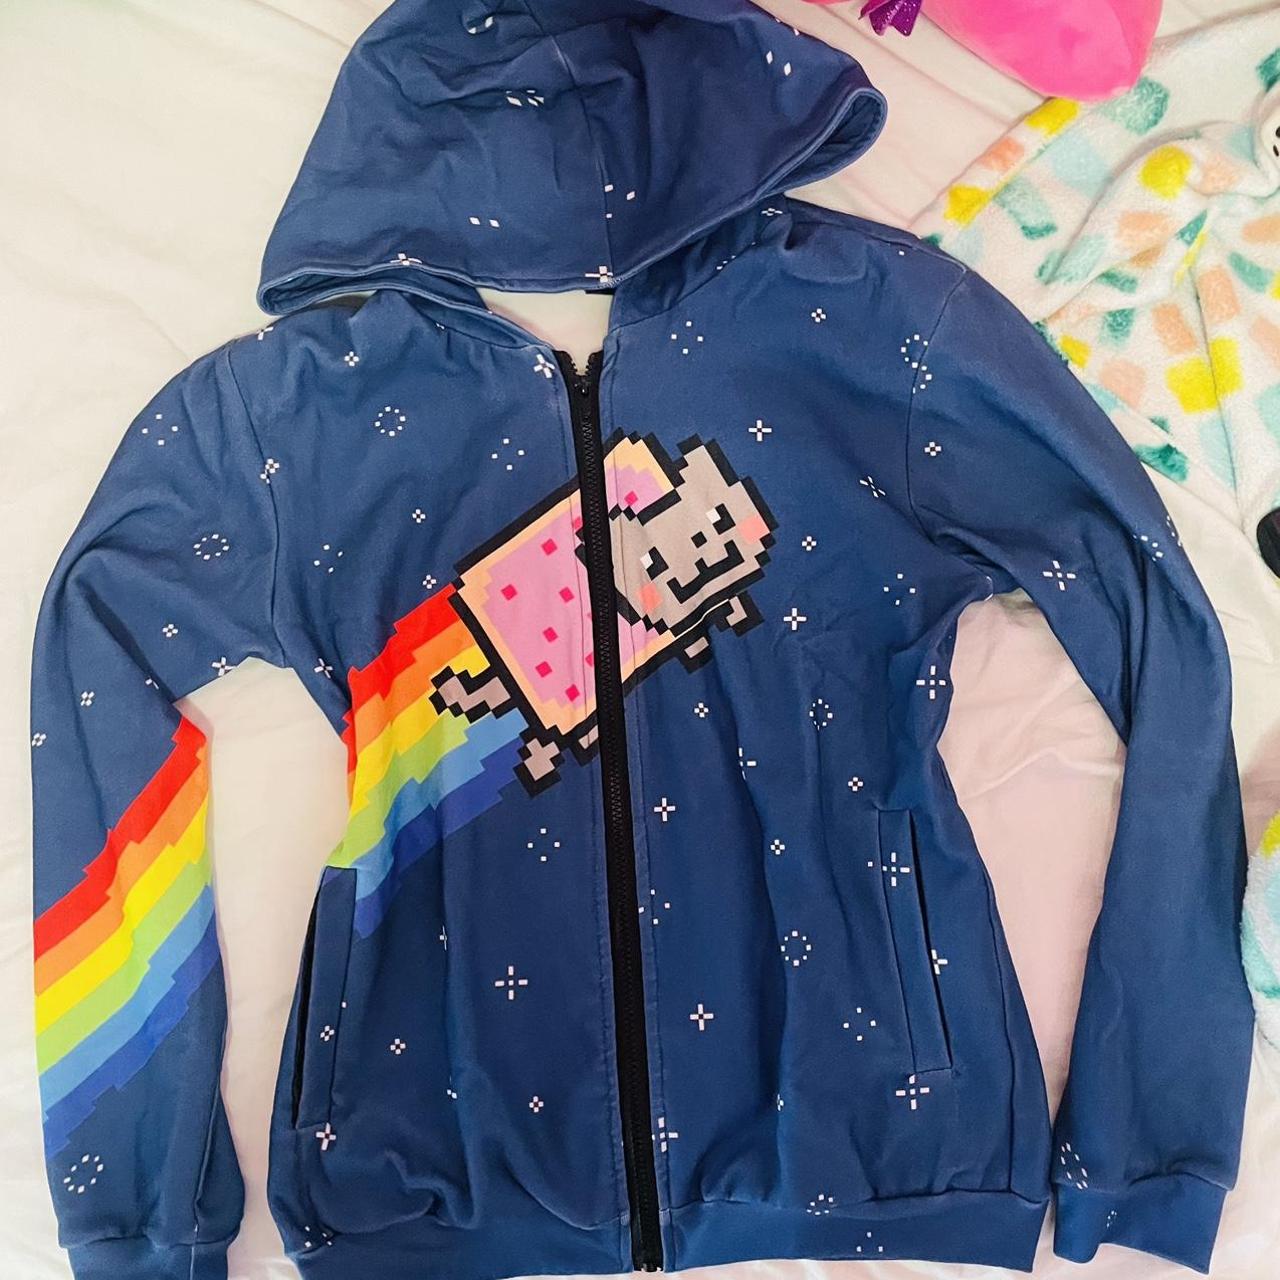 Nyan cat hoodie ⚠️DONT BUY⚠️ will trade if you want... - Depop